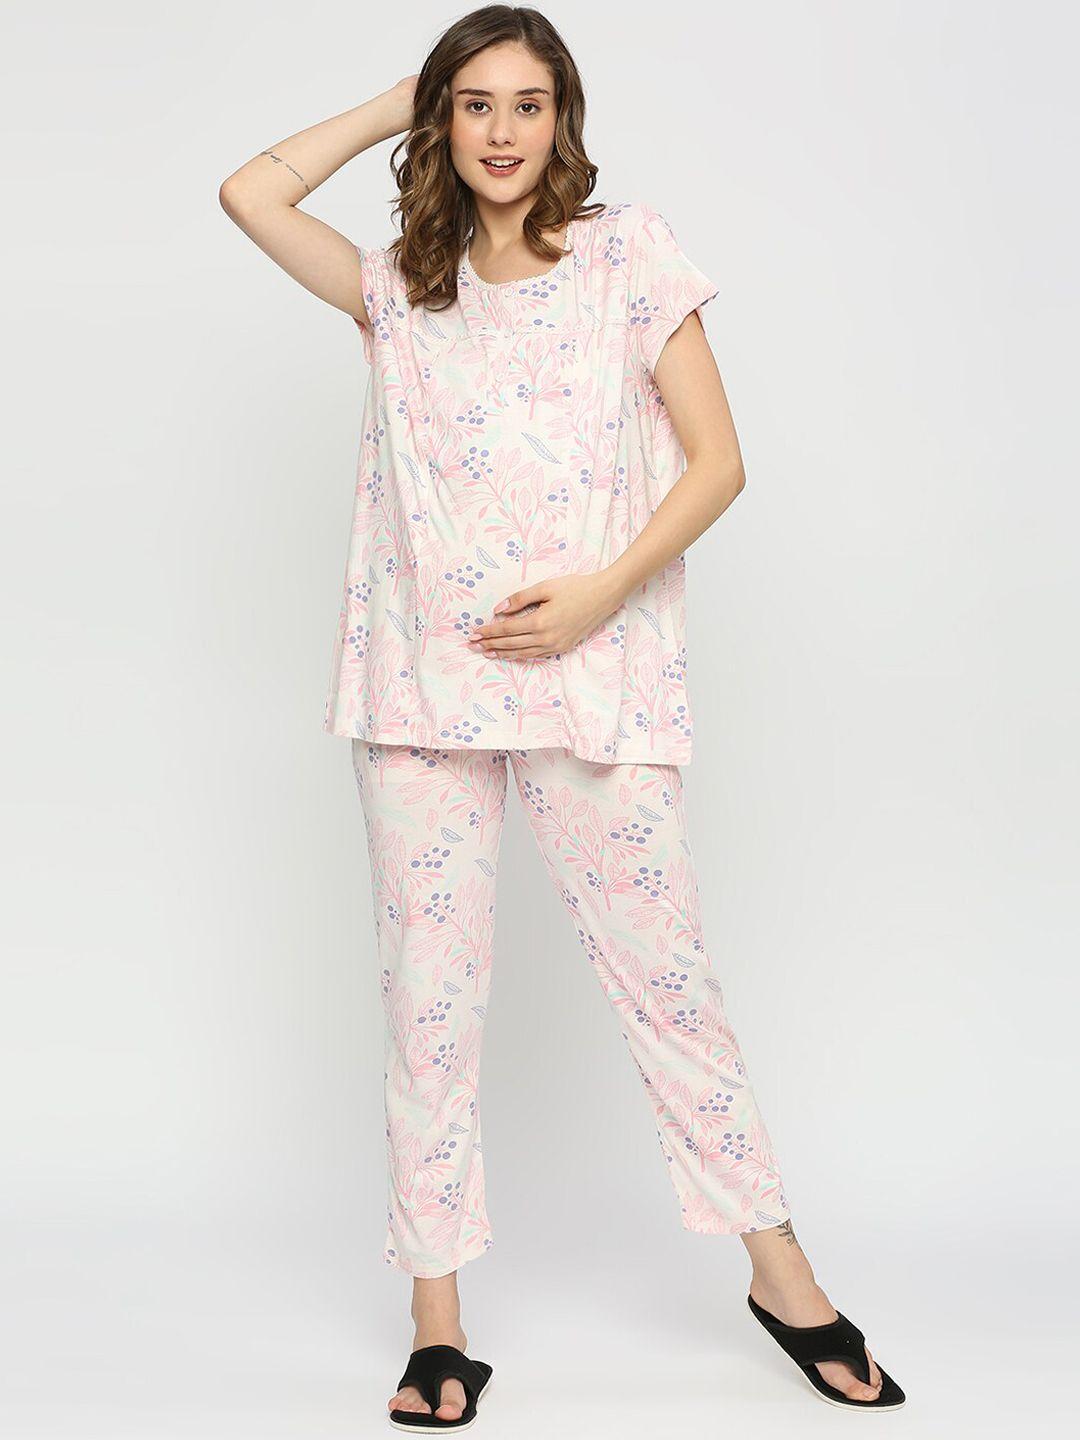 meemee floral printed pure cotton maternity night suit